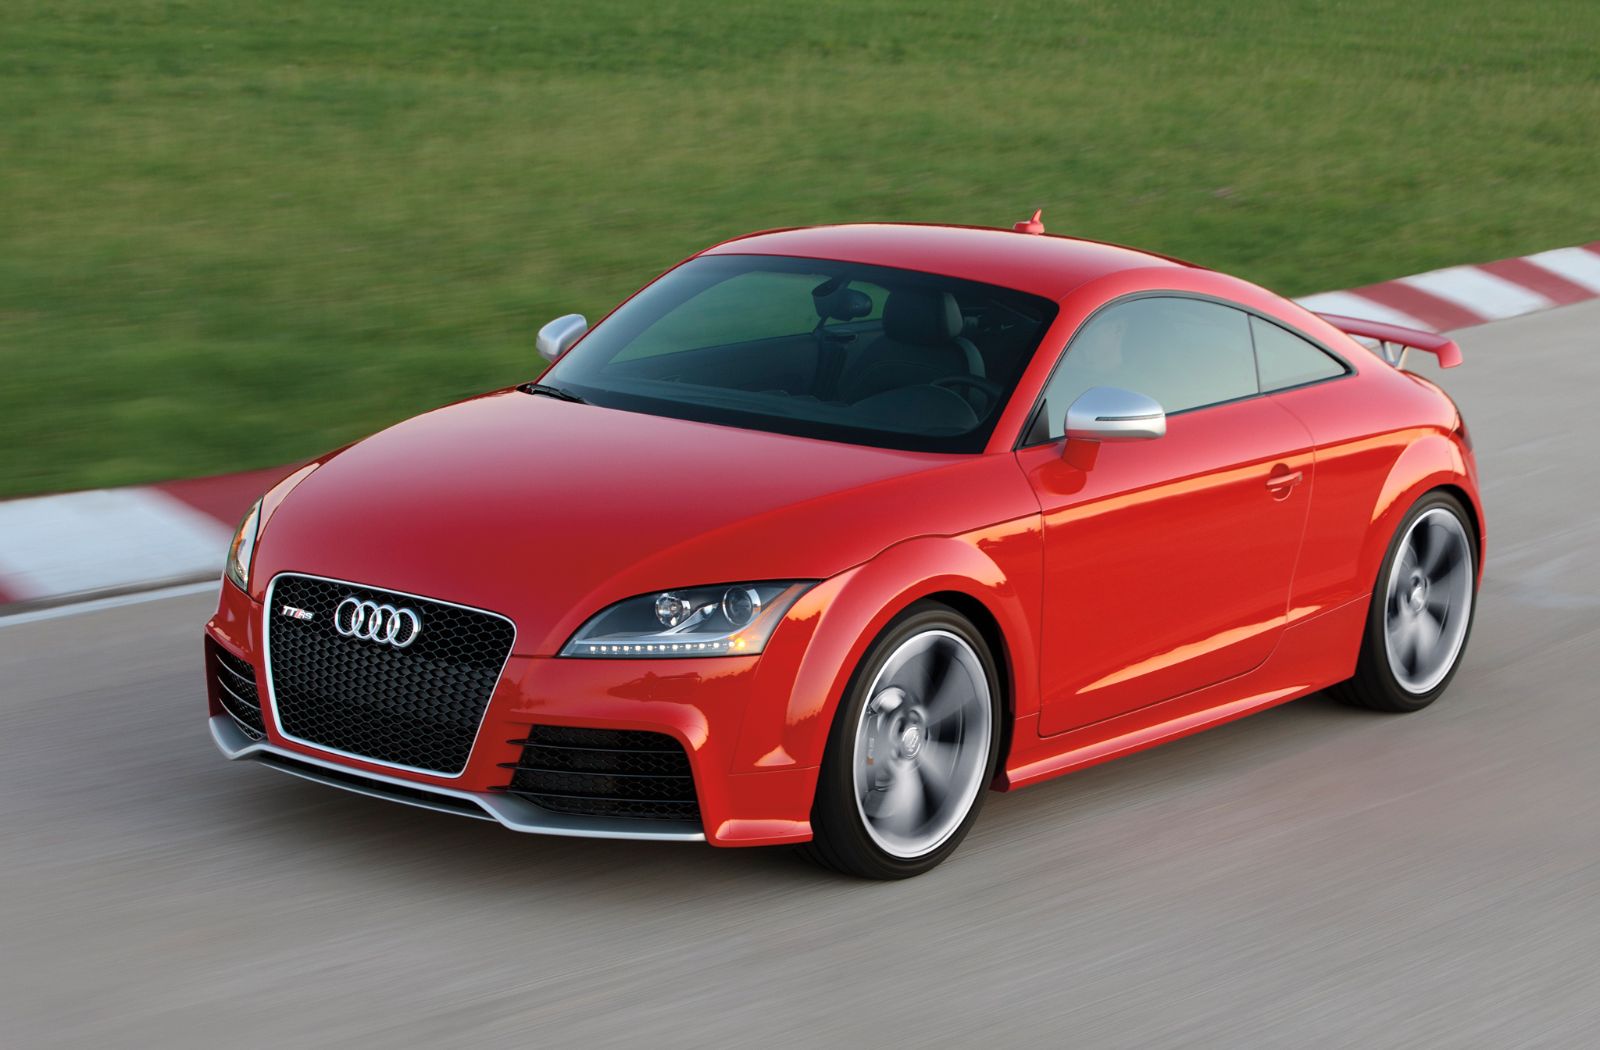 The Audi TT RS 'iconic edition' is a five-cylinder celebration of the TT